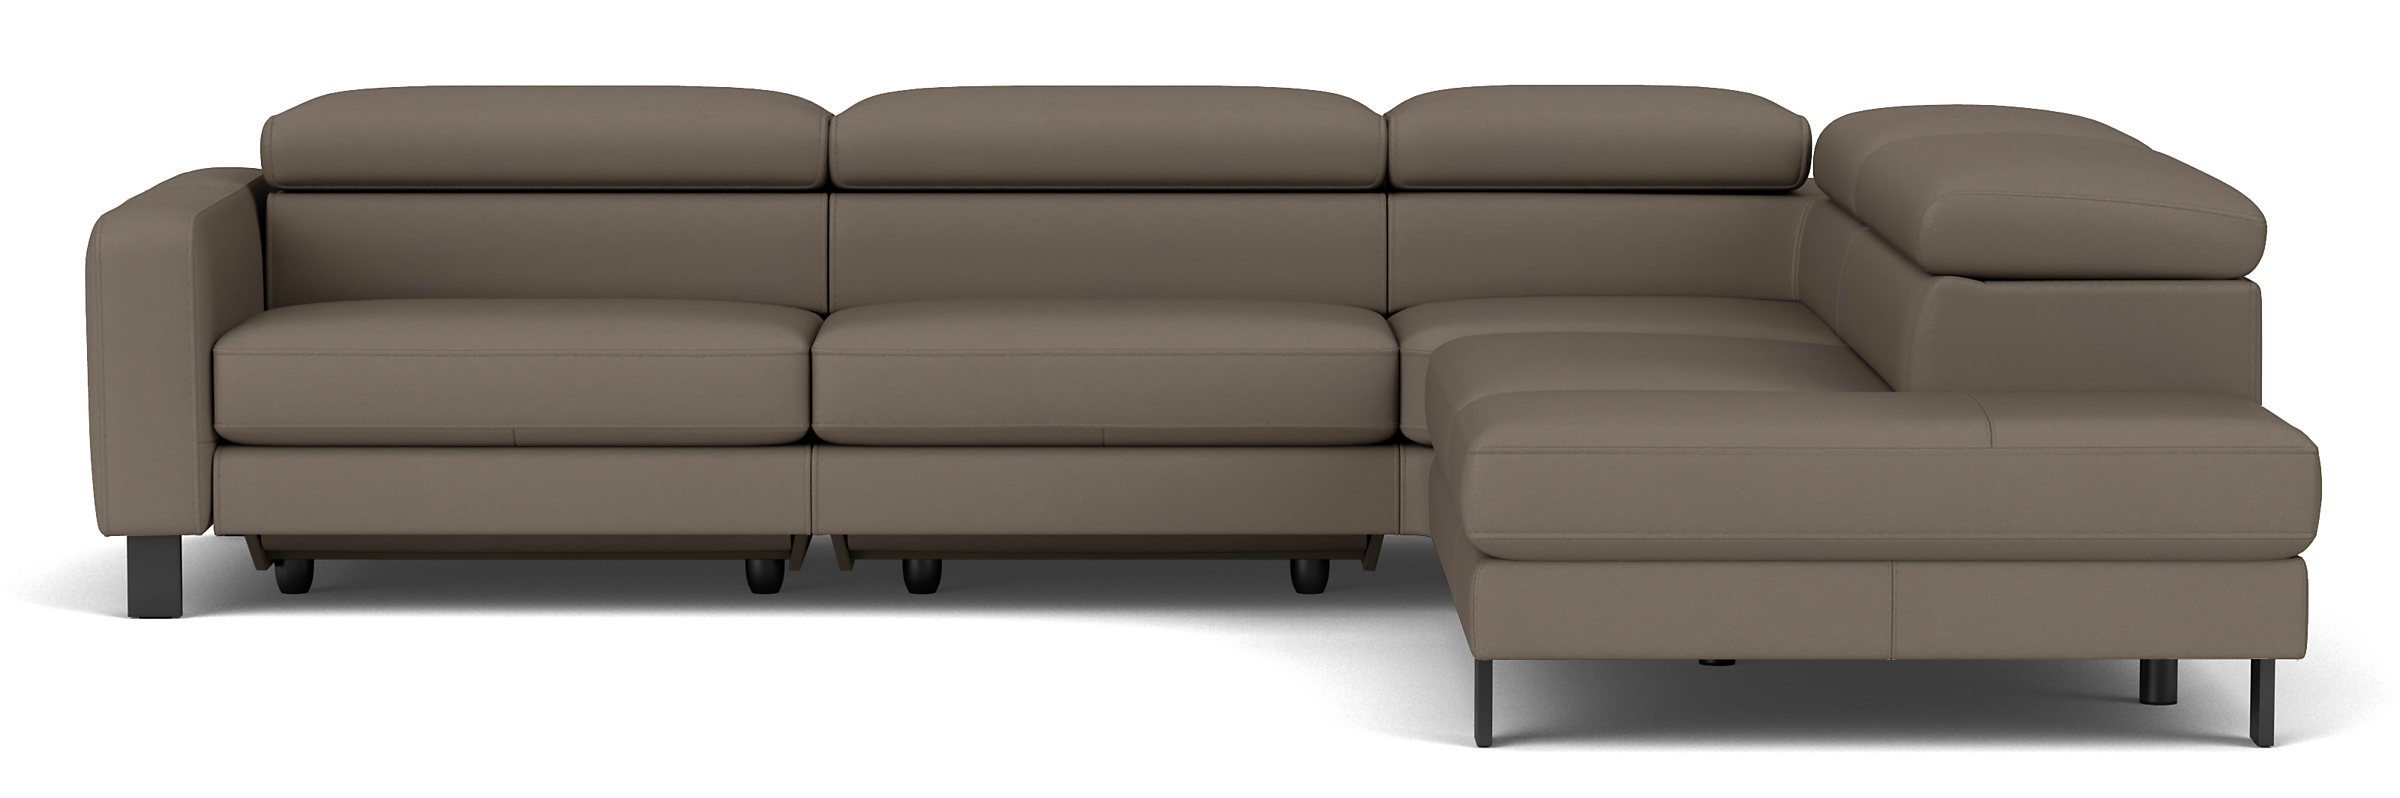 Elio Leather Power-reclining Sofas with Chaise